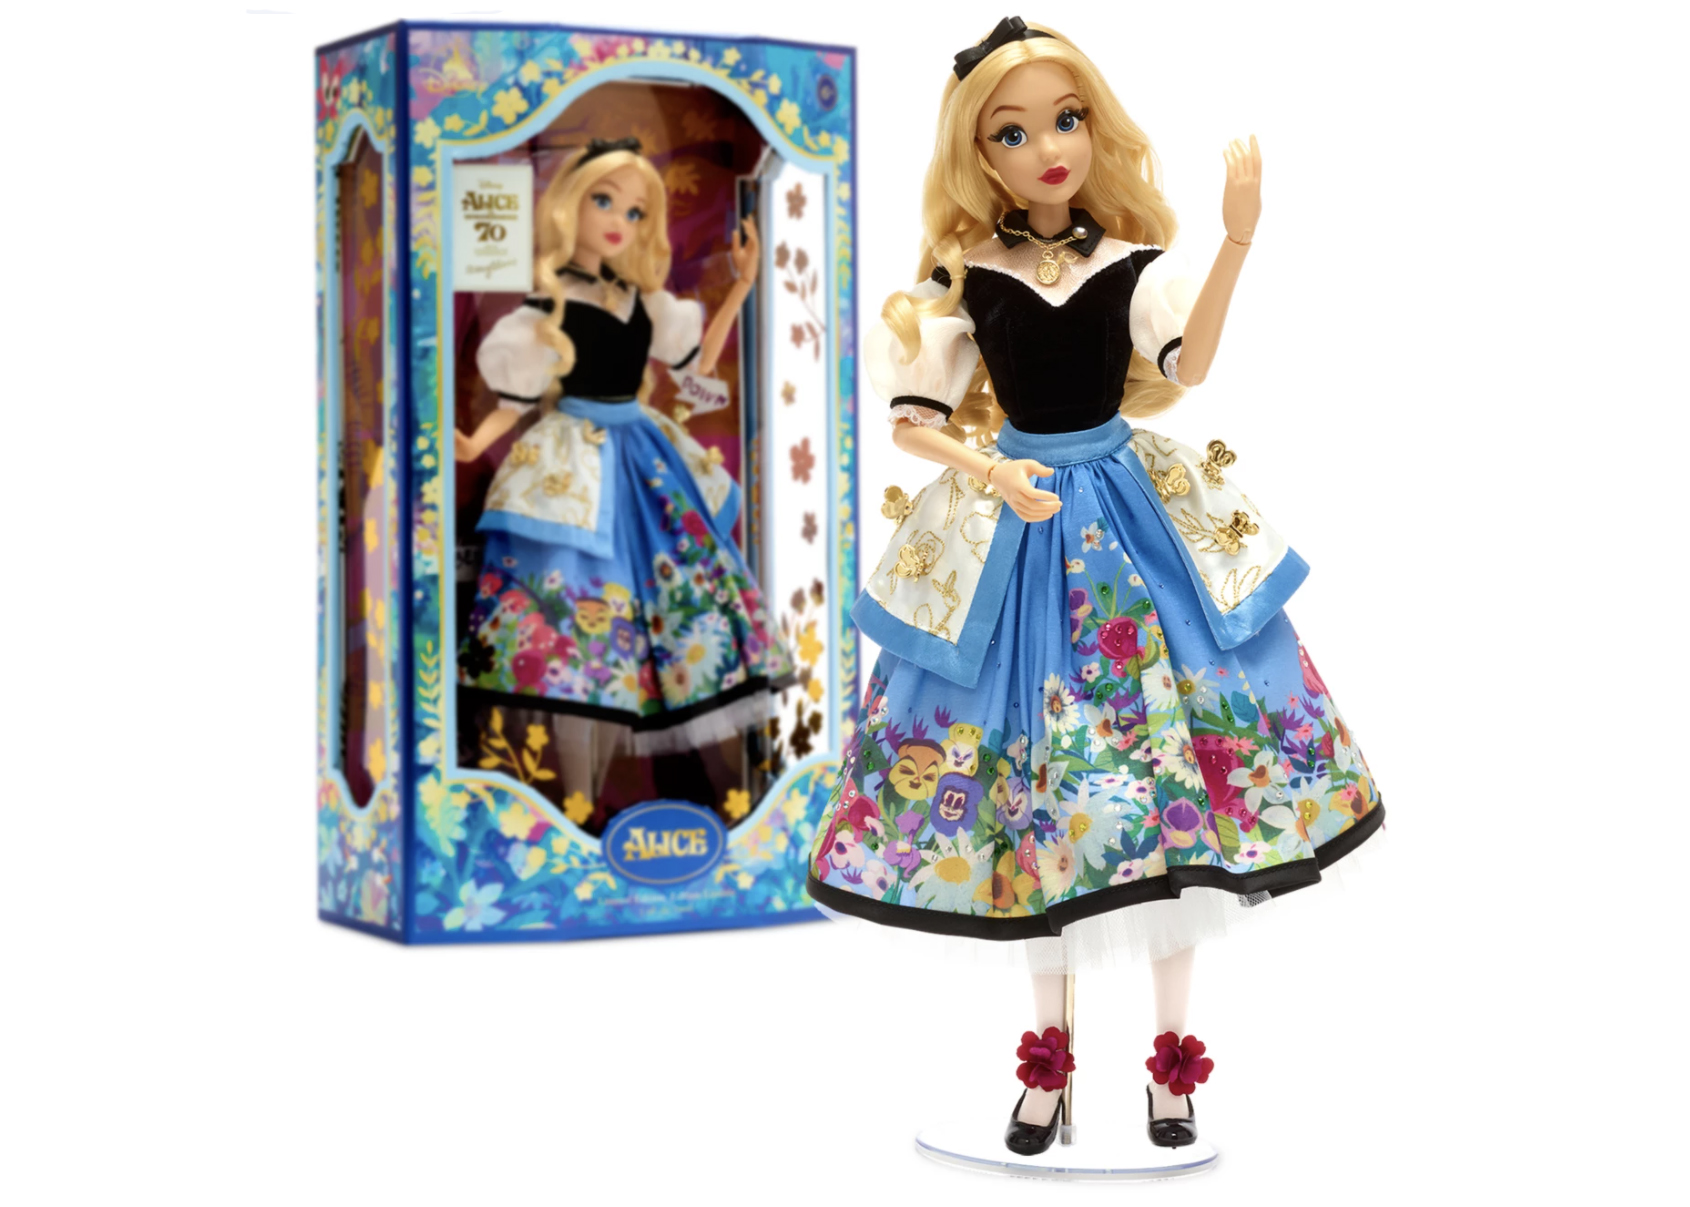 Disney Alice in Wonderland by Mary Blair Limited Edition Doll ...